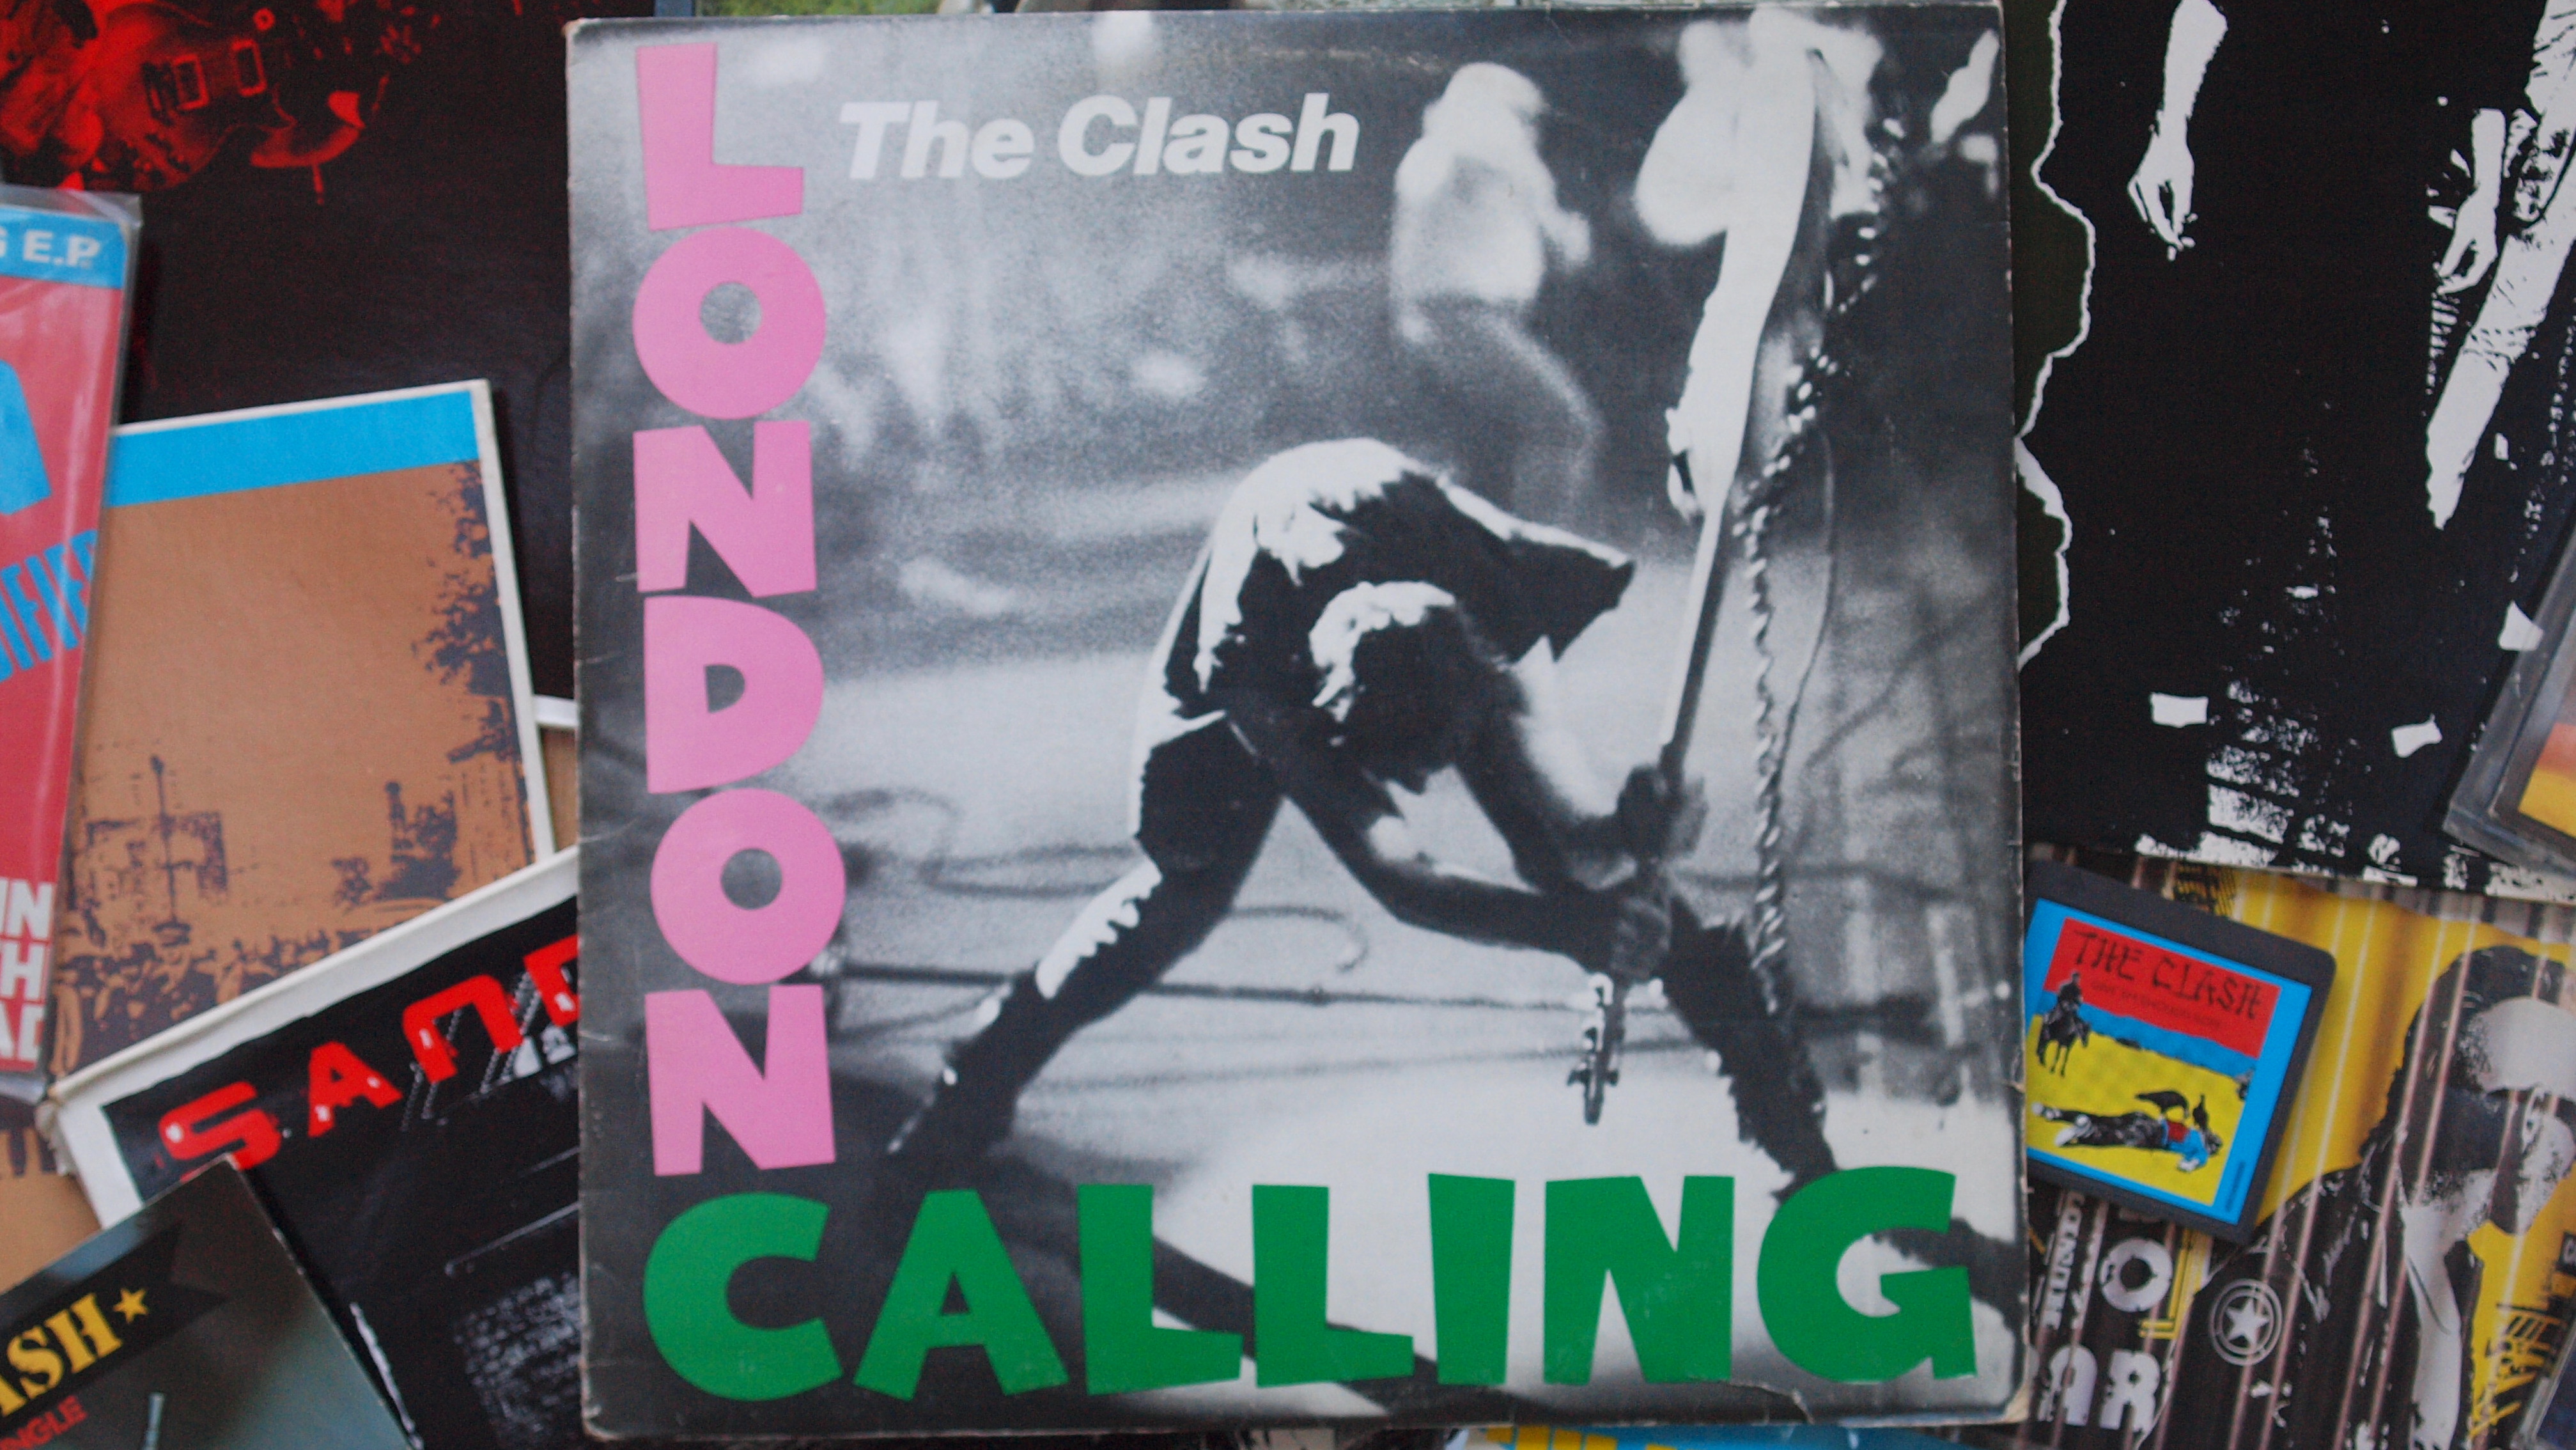 Jimmy Jazz by The Clash from the album London Calling